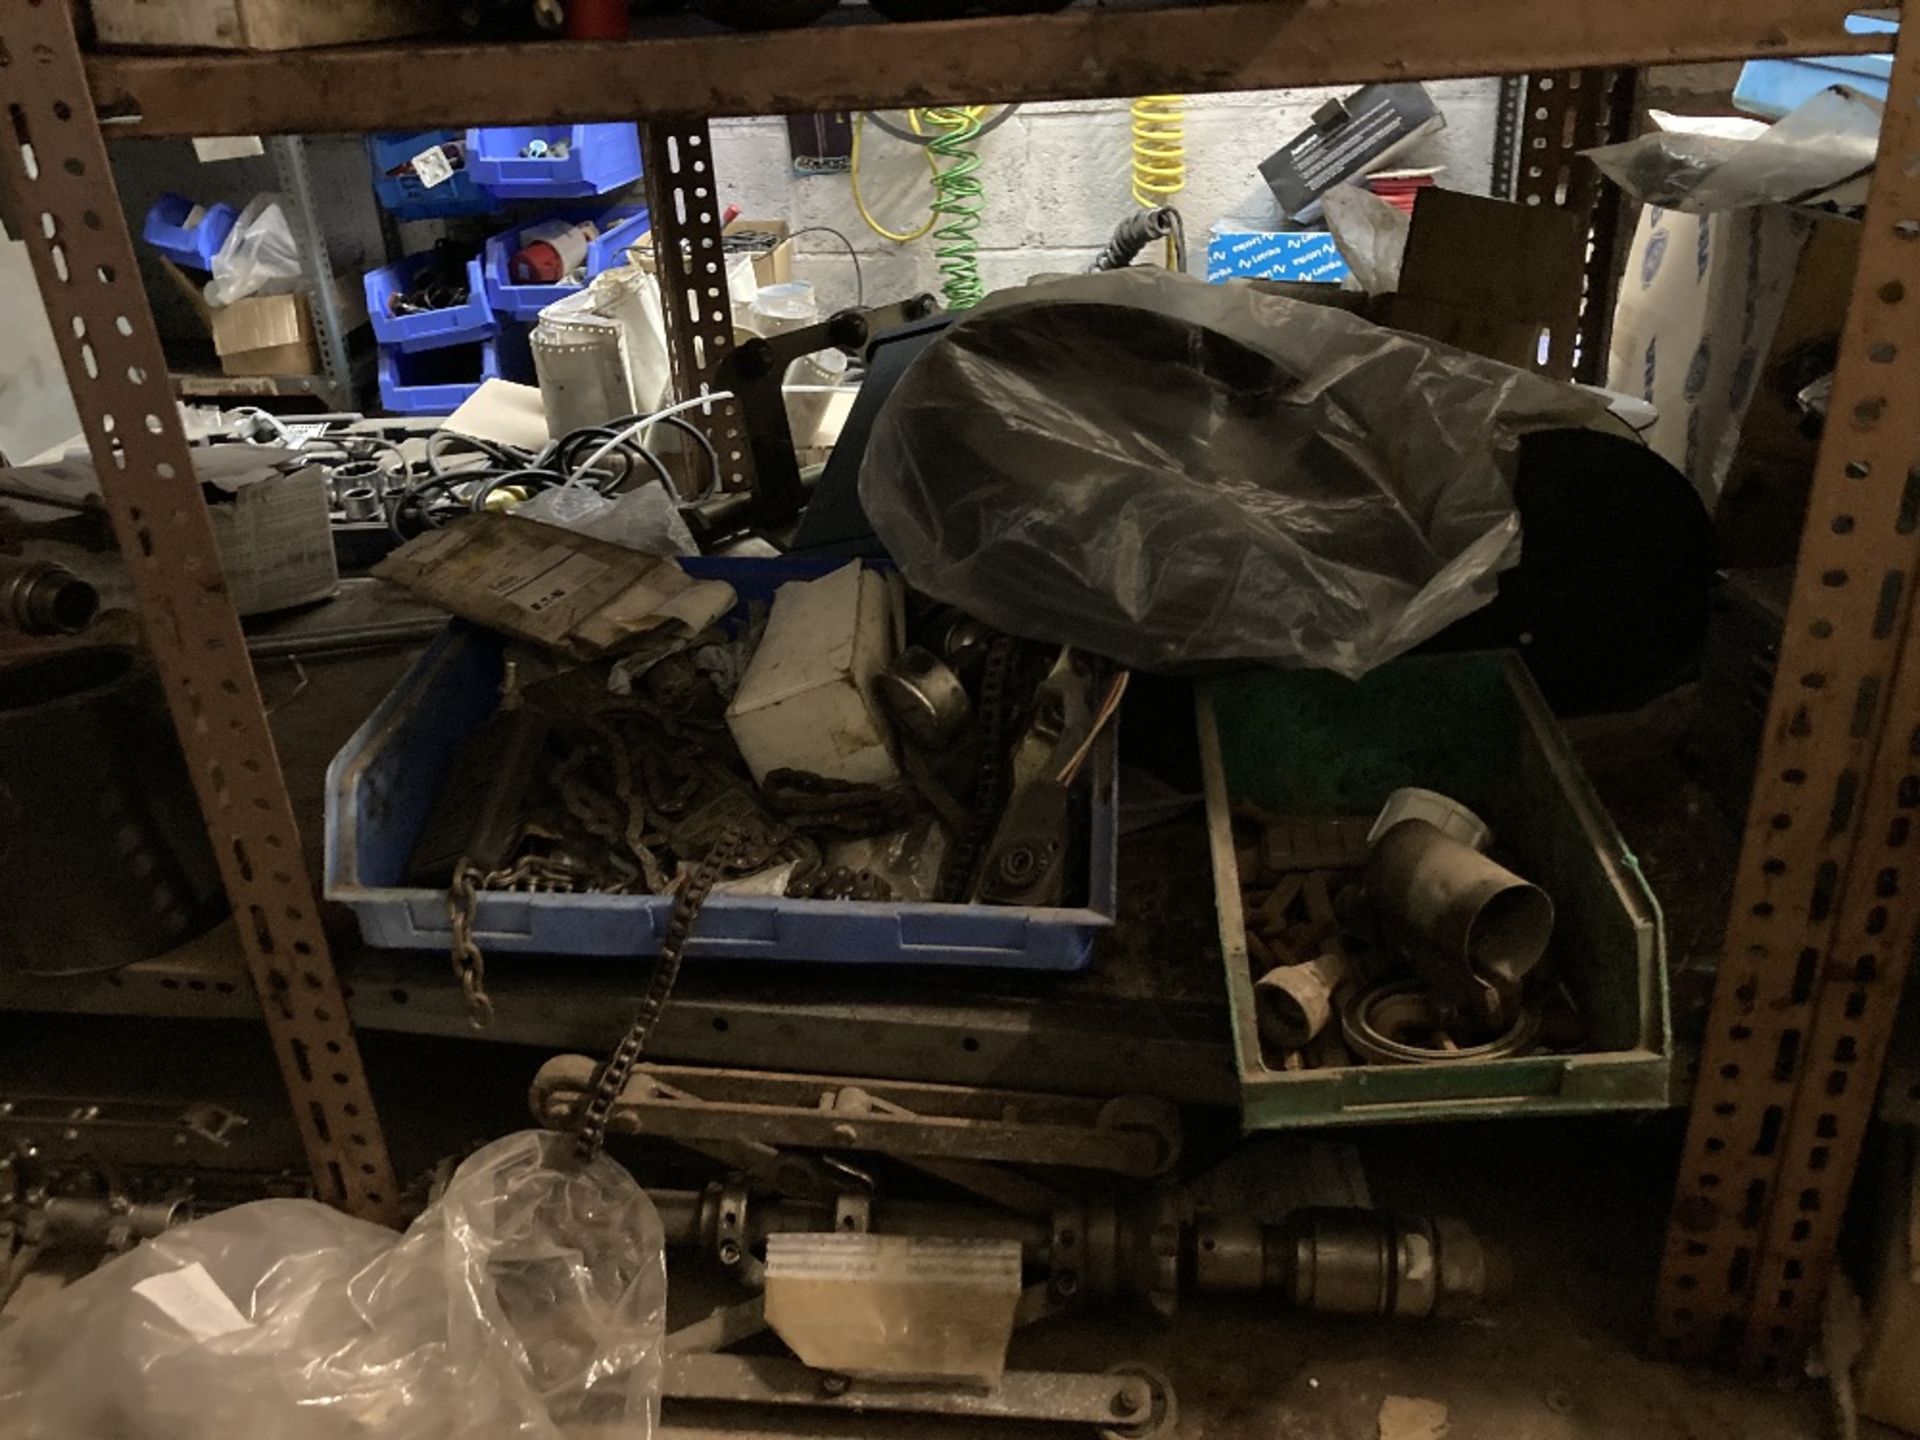 Content of Parts Room Containing Large Quantity of Various Parts & Components - Image 118 of 150